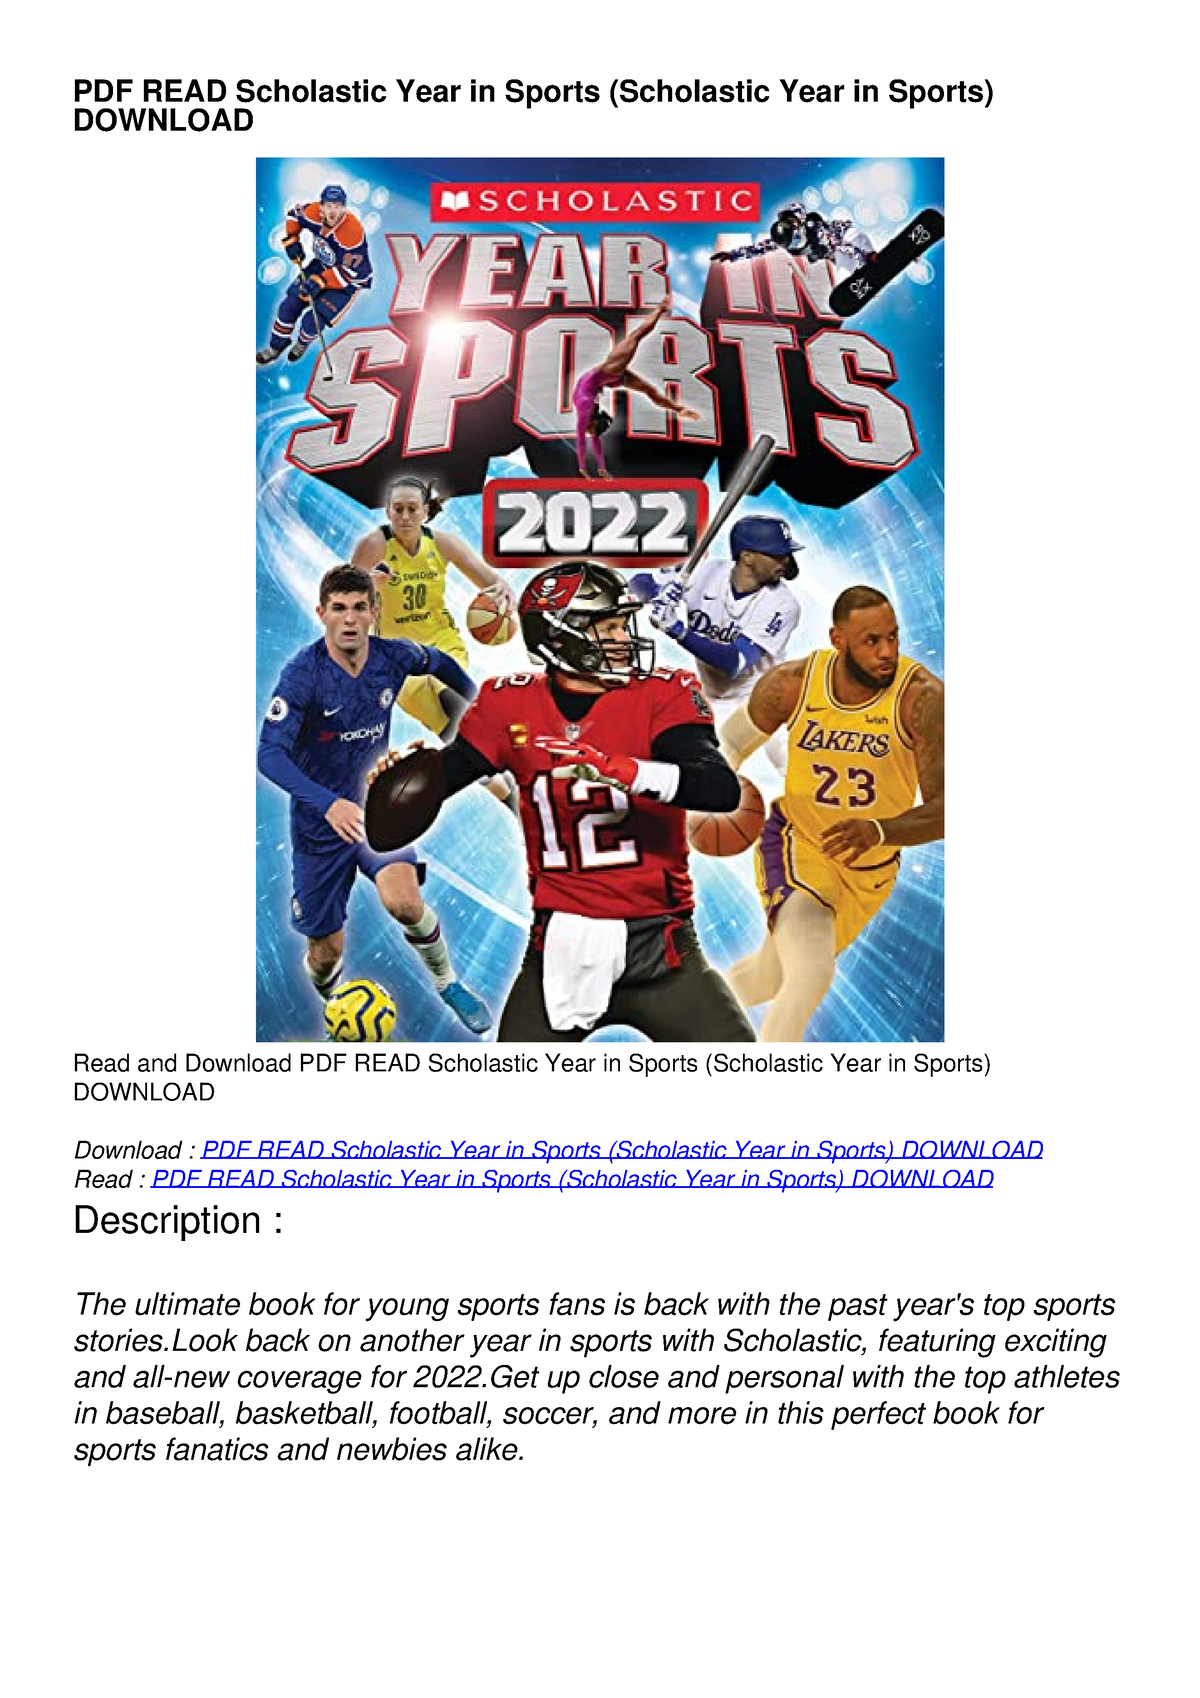 pdf-read-scholastic-year-in-sports-scholastic-year-in-sports-download-biology-studocu